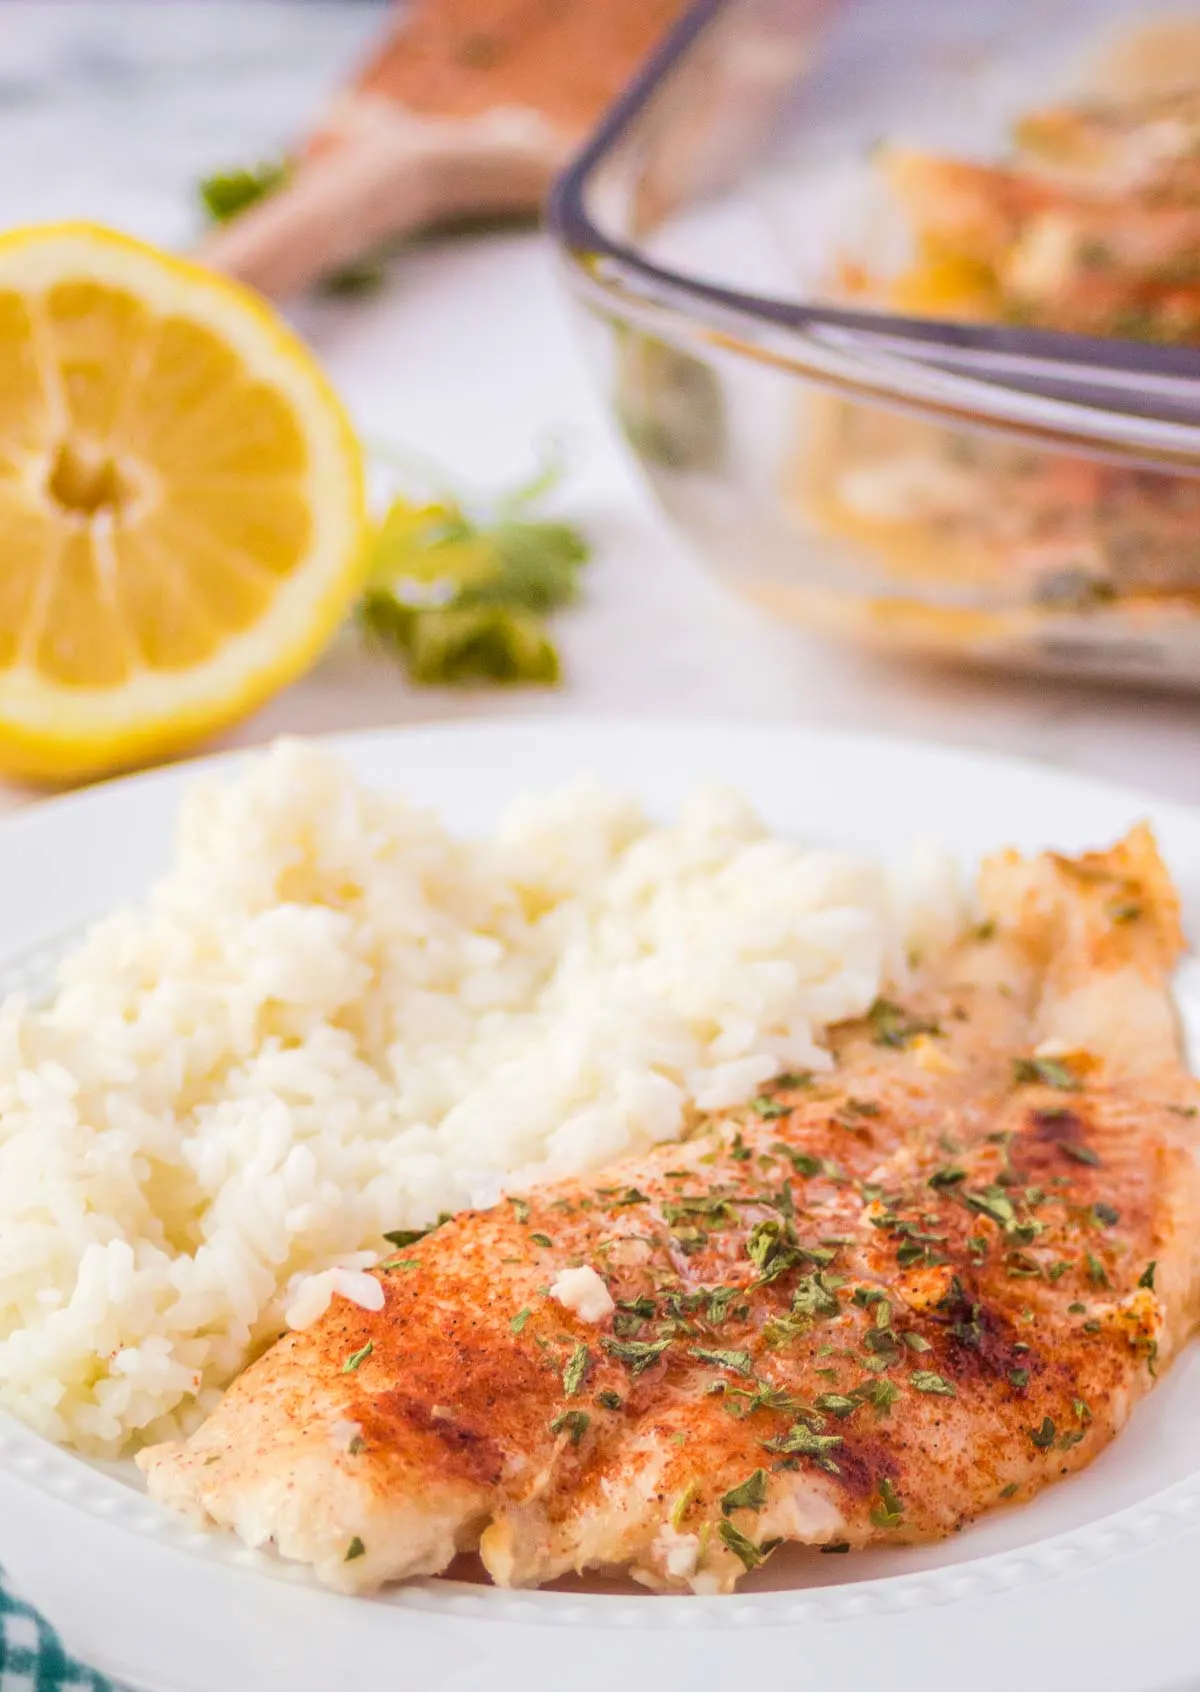 Baked swai fish on a plate with rice.